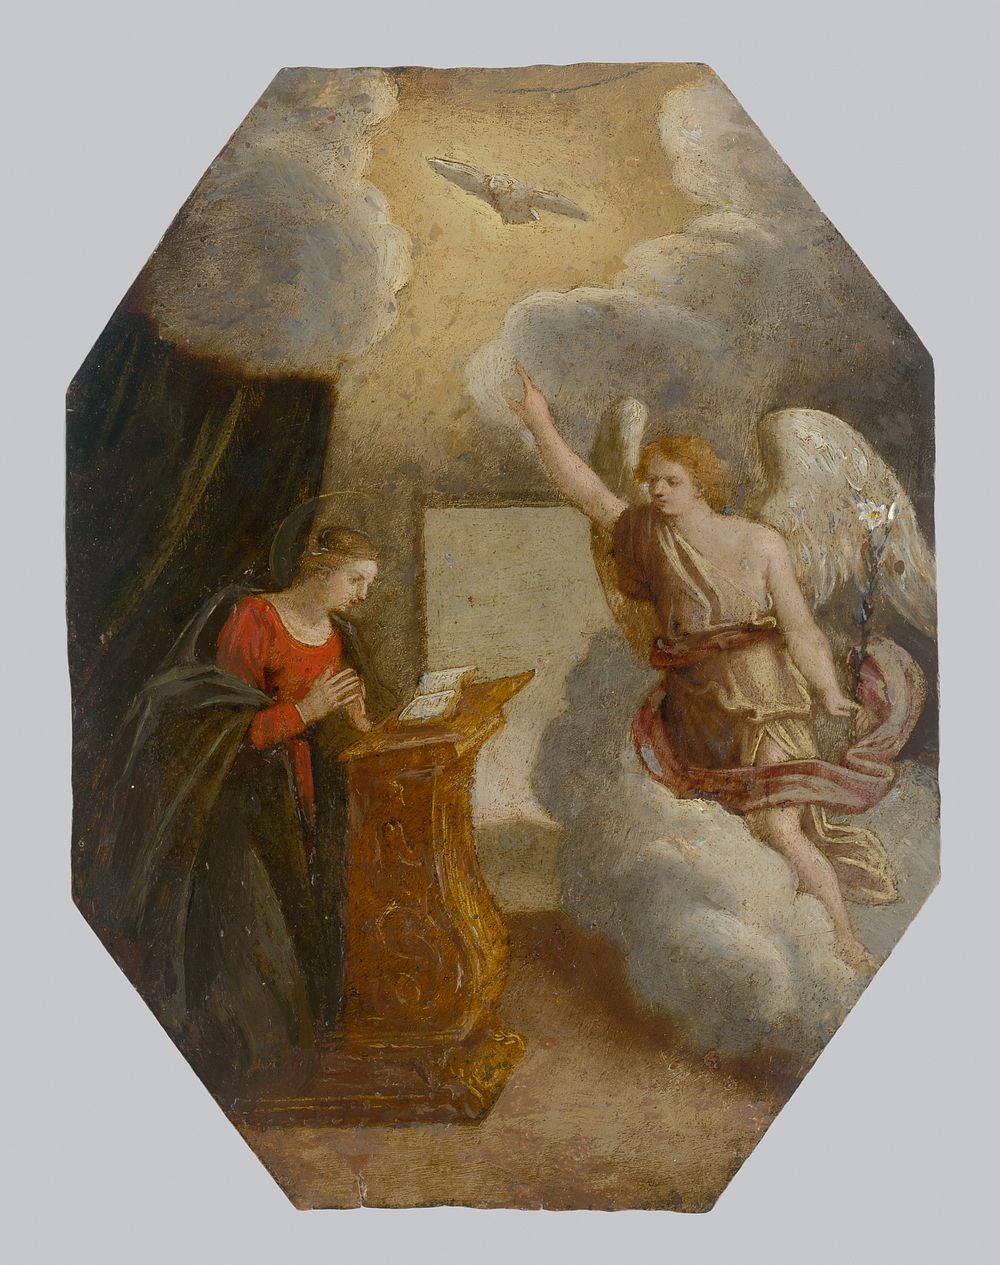 Annunciation to the blessed virgin mary